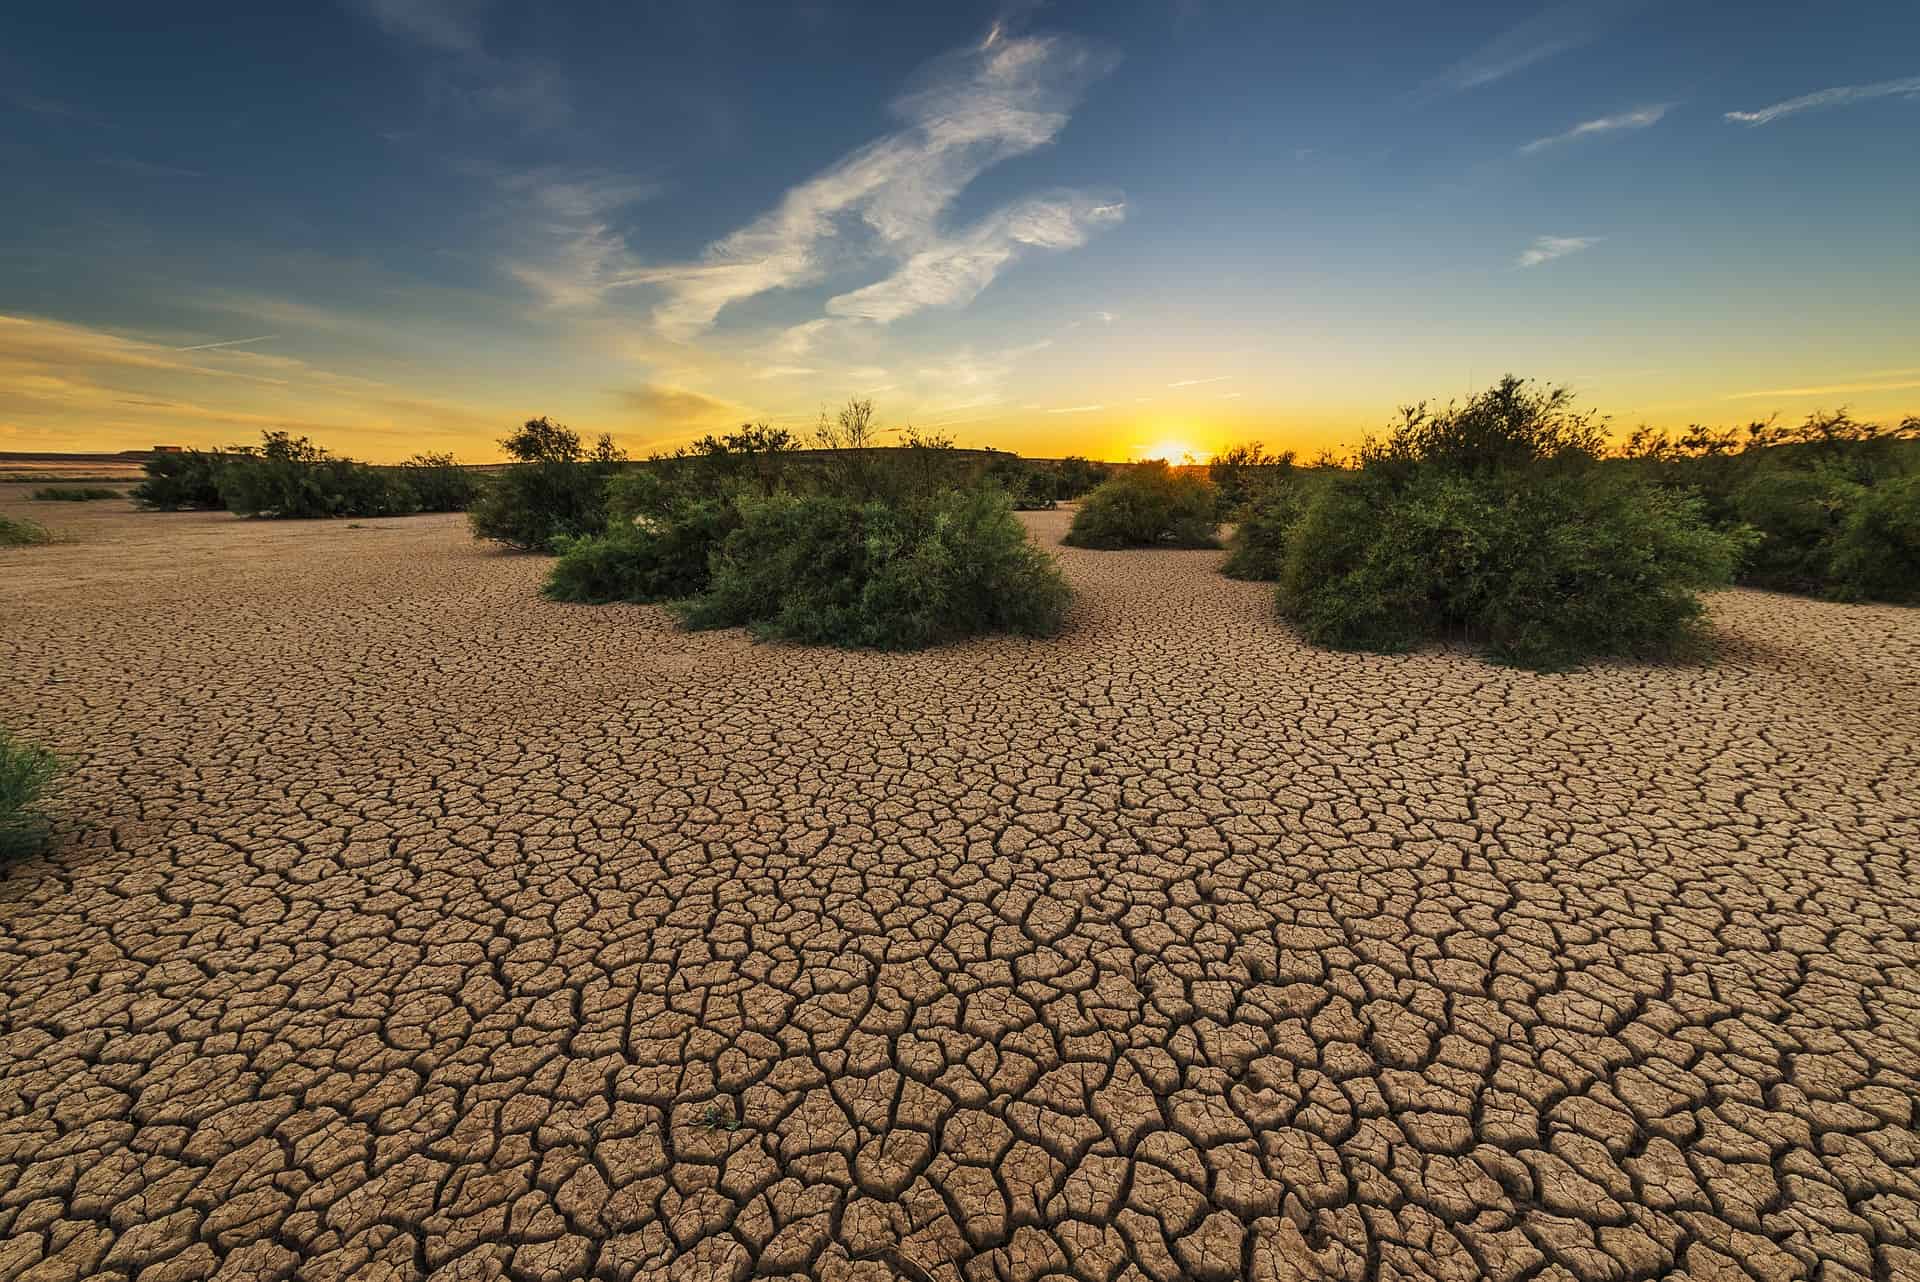 More than half of the world's large lakes are drying up